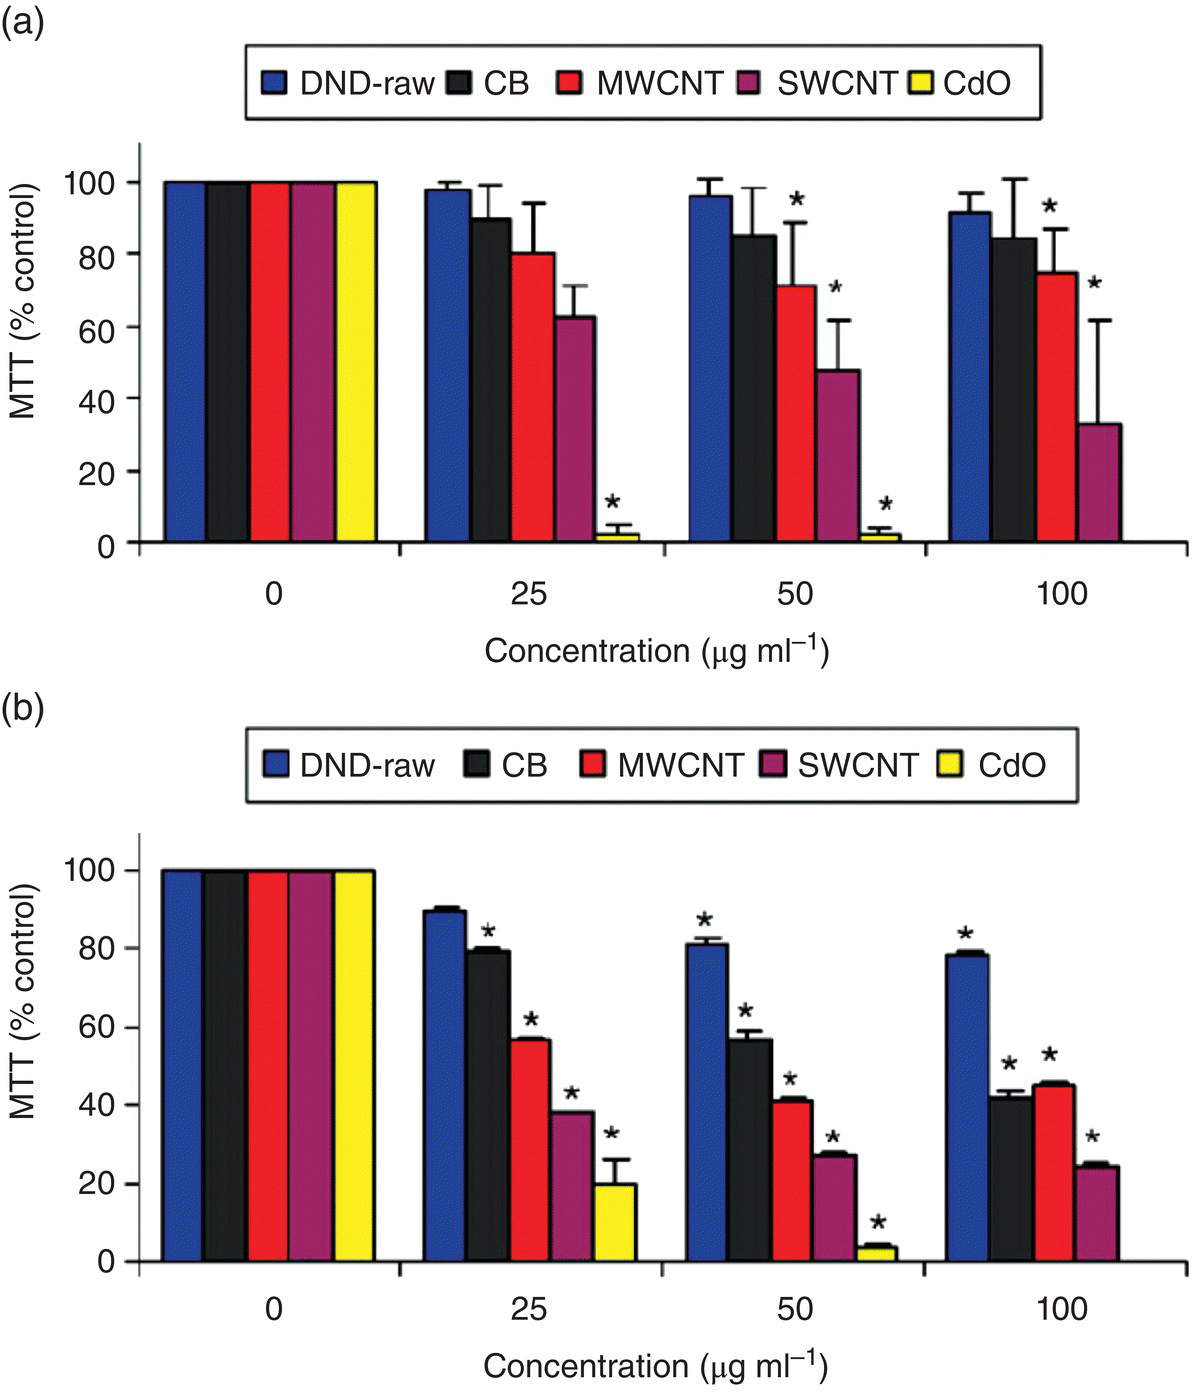 Clustered bar graph of cytotoxicity measurements after 24‐h incubation of various nanocarbons in neuroblastoma cells (top) and macrophages (bottom). The bars represent ND-raw, CB, MWNT, SWNT, and CdO.